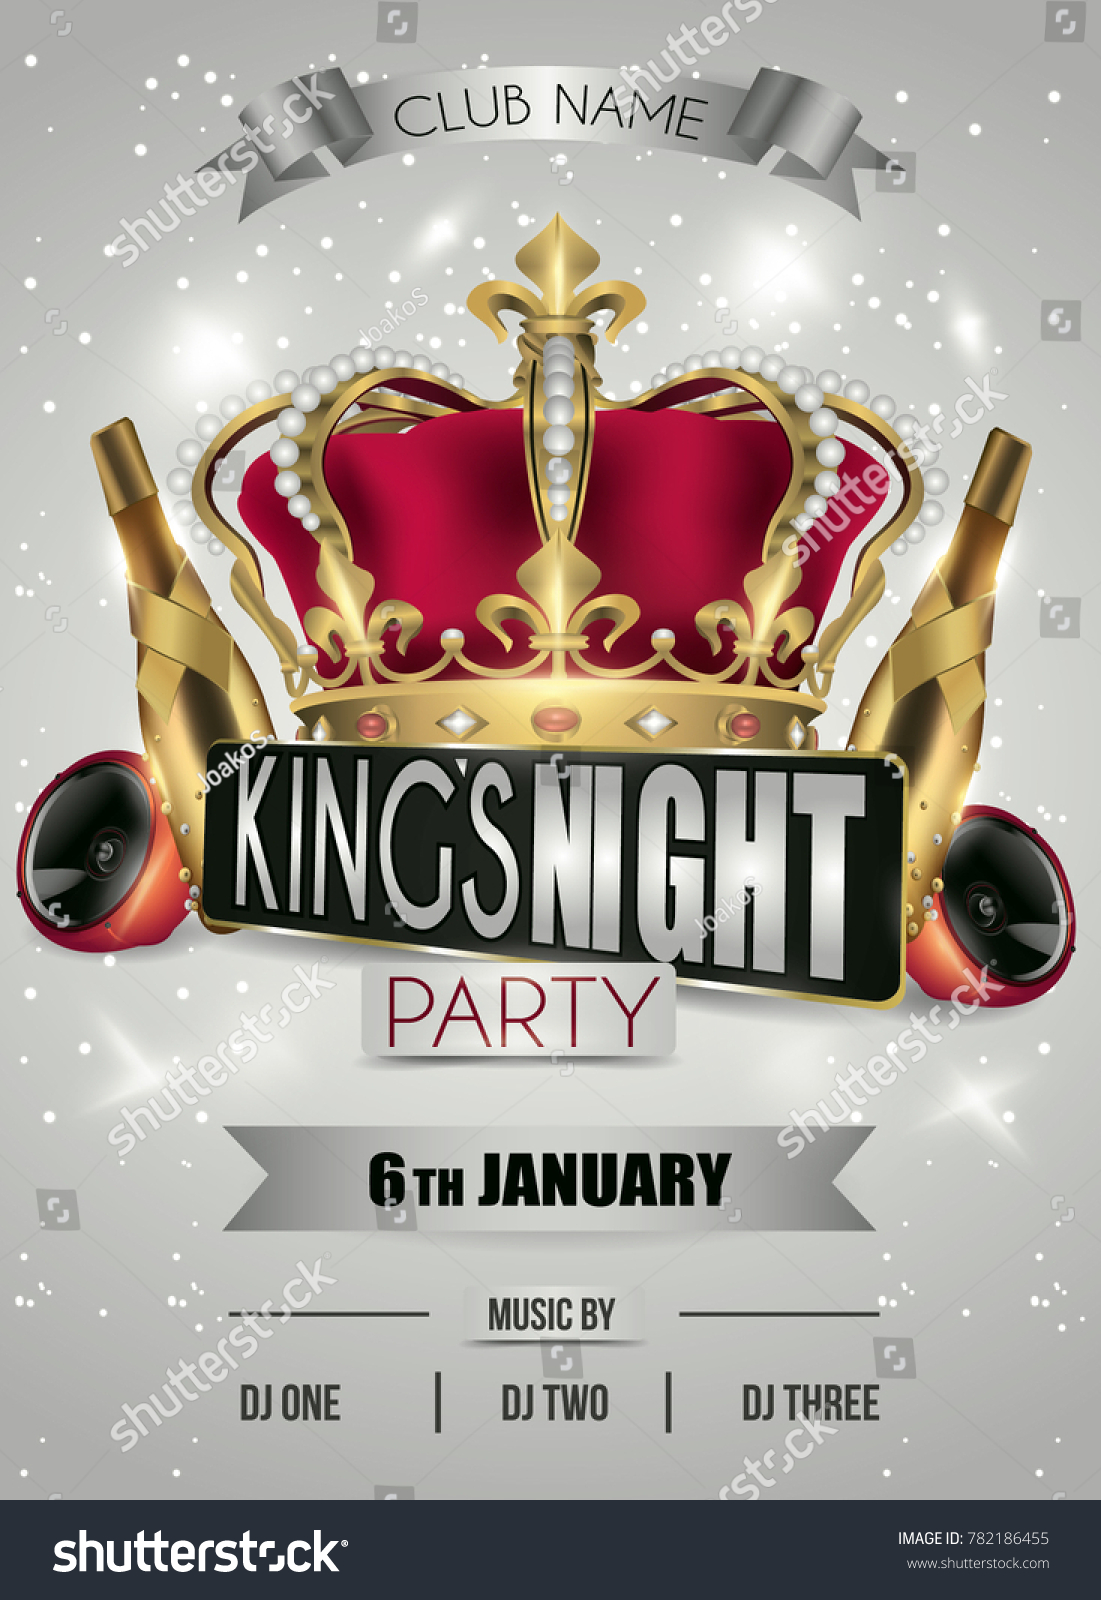 Kings Night Party Flyer Background Gray Stock Vector Royalty Free